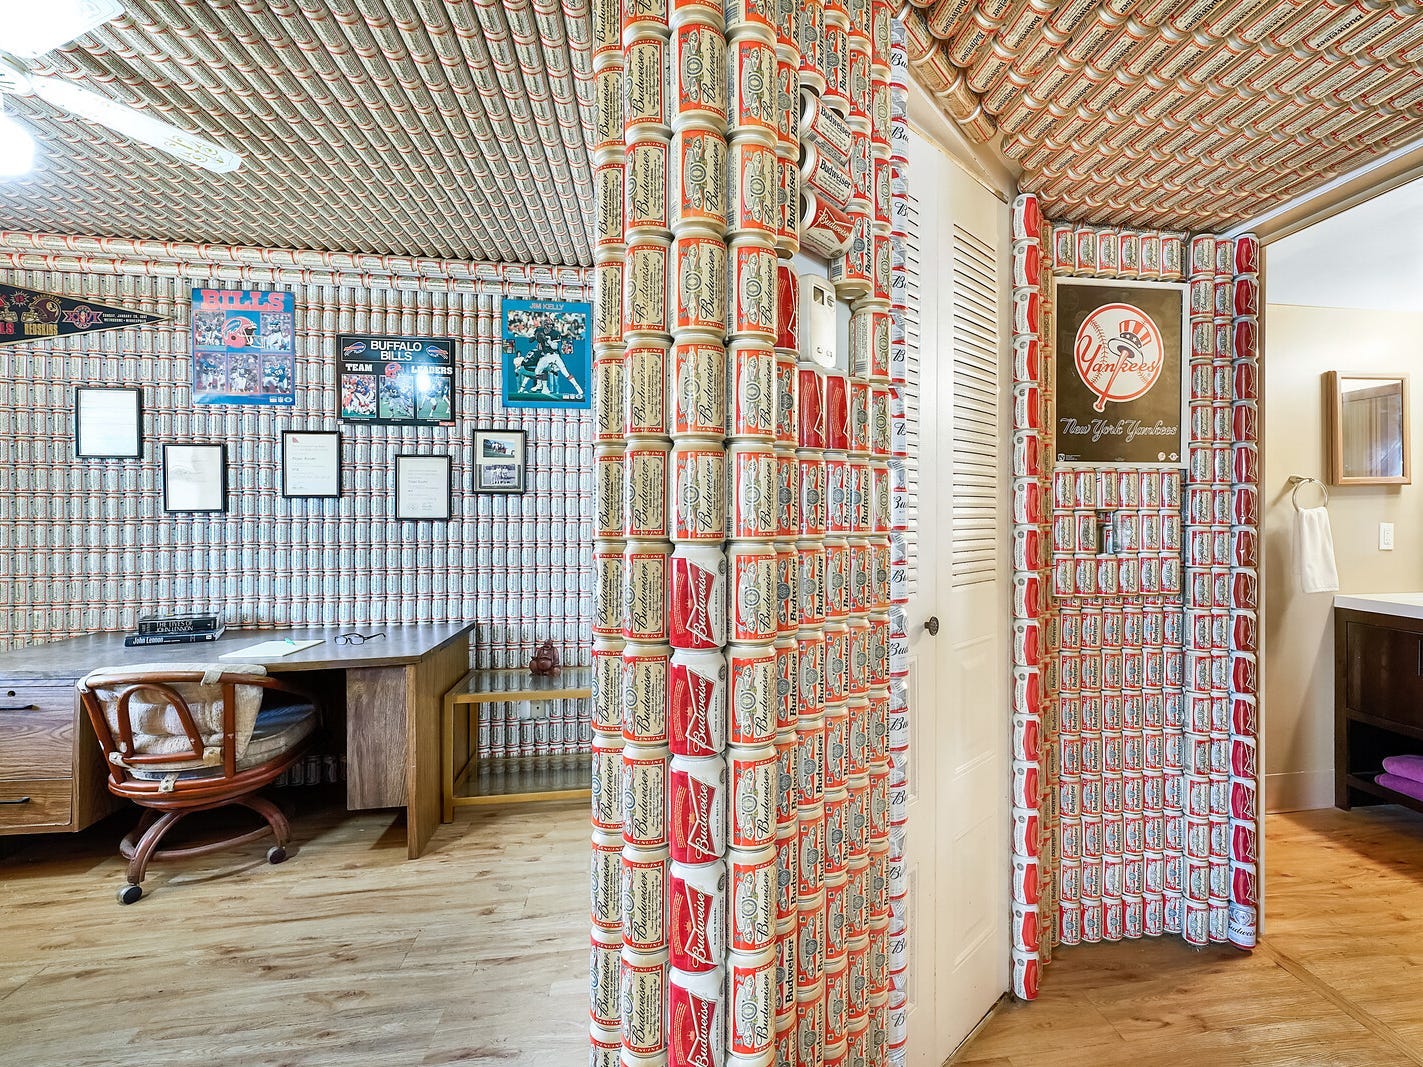 Amelotte drank every single beer can that decorates the home.